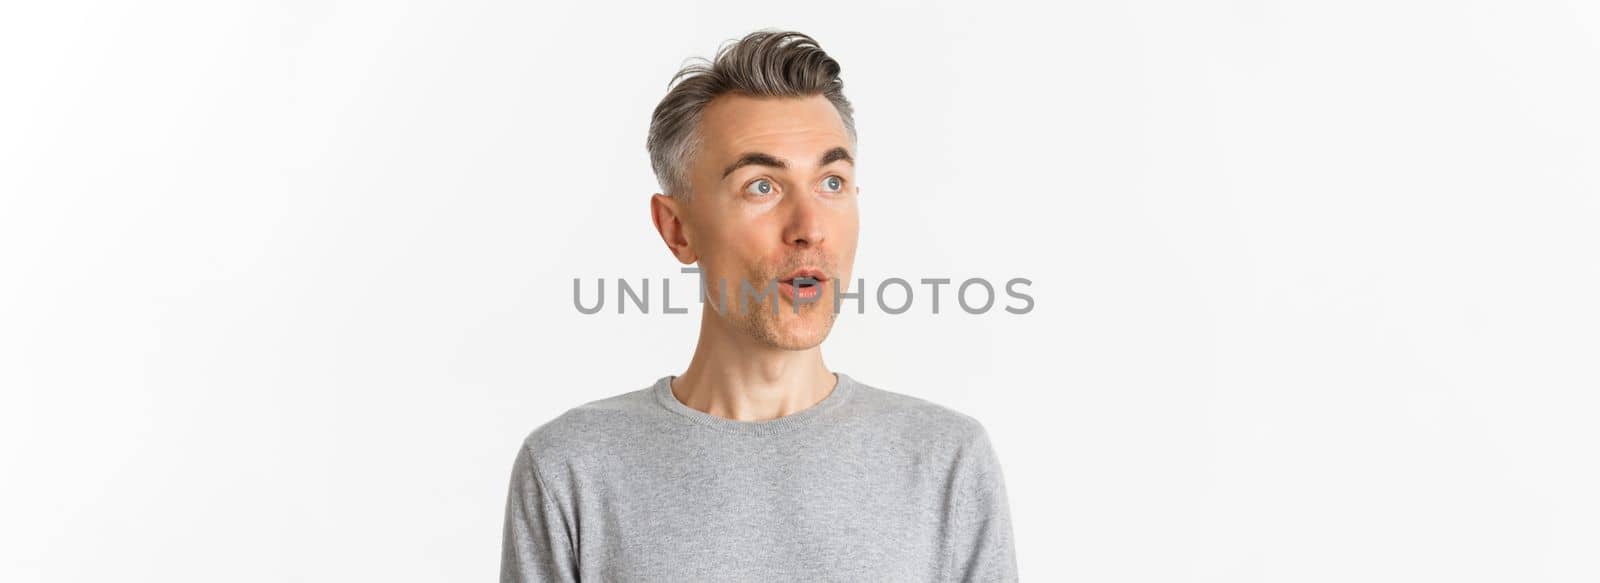 Close-up of handsome, middle-aged guy with gray hair, open mouth and looking amazed at upper left corner, standing against white background.